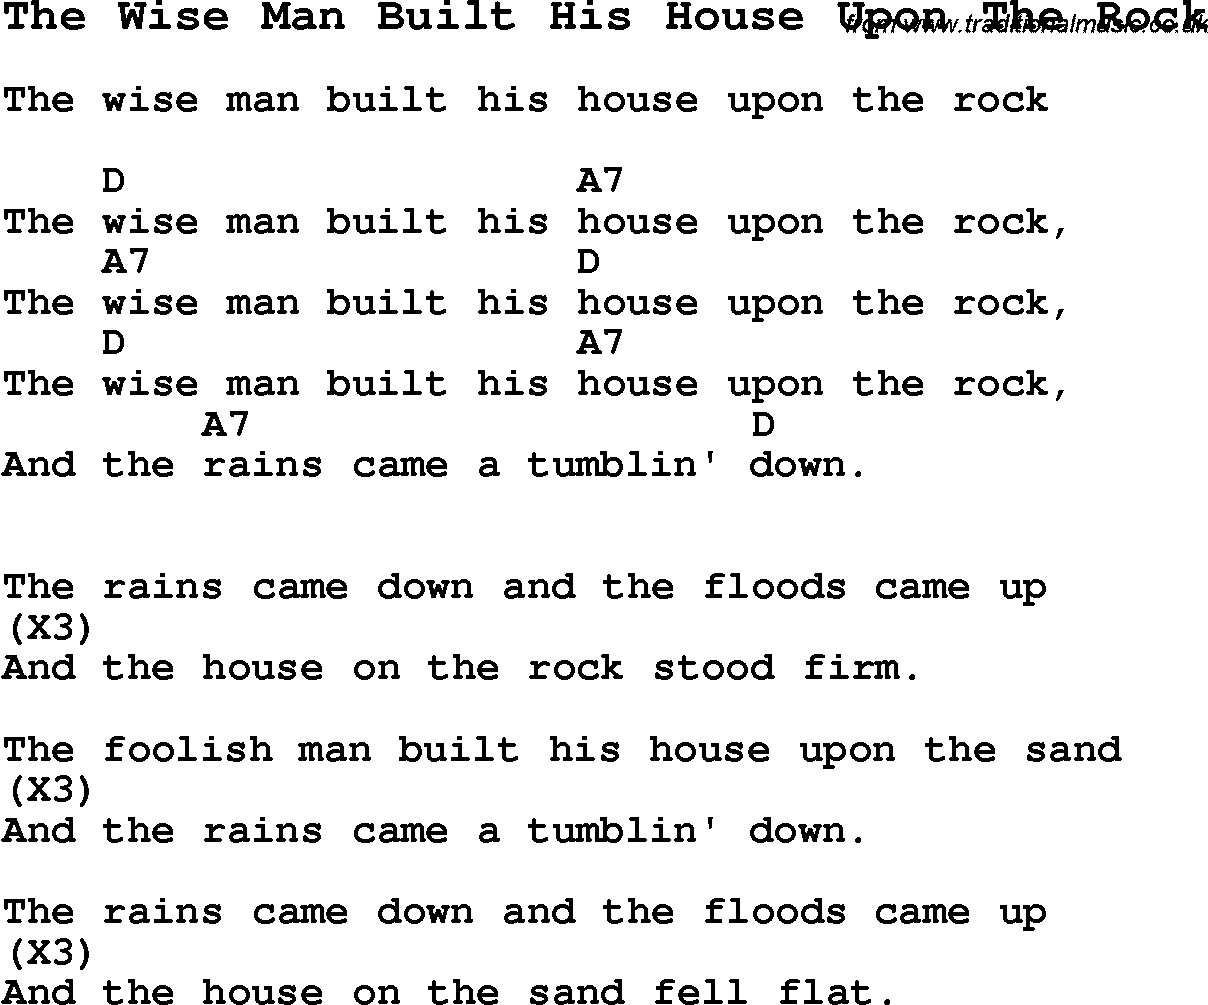 Summer-Camp Song, The Wise Man Built His House Upon The Rock, with lyrics and chords for Ukulele, Guitar Banjo etc.